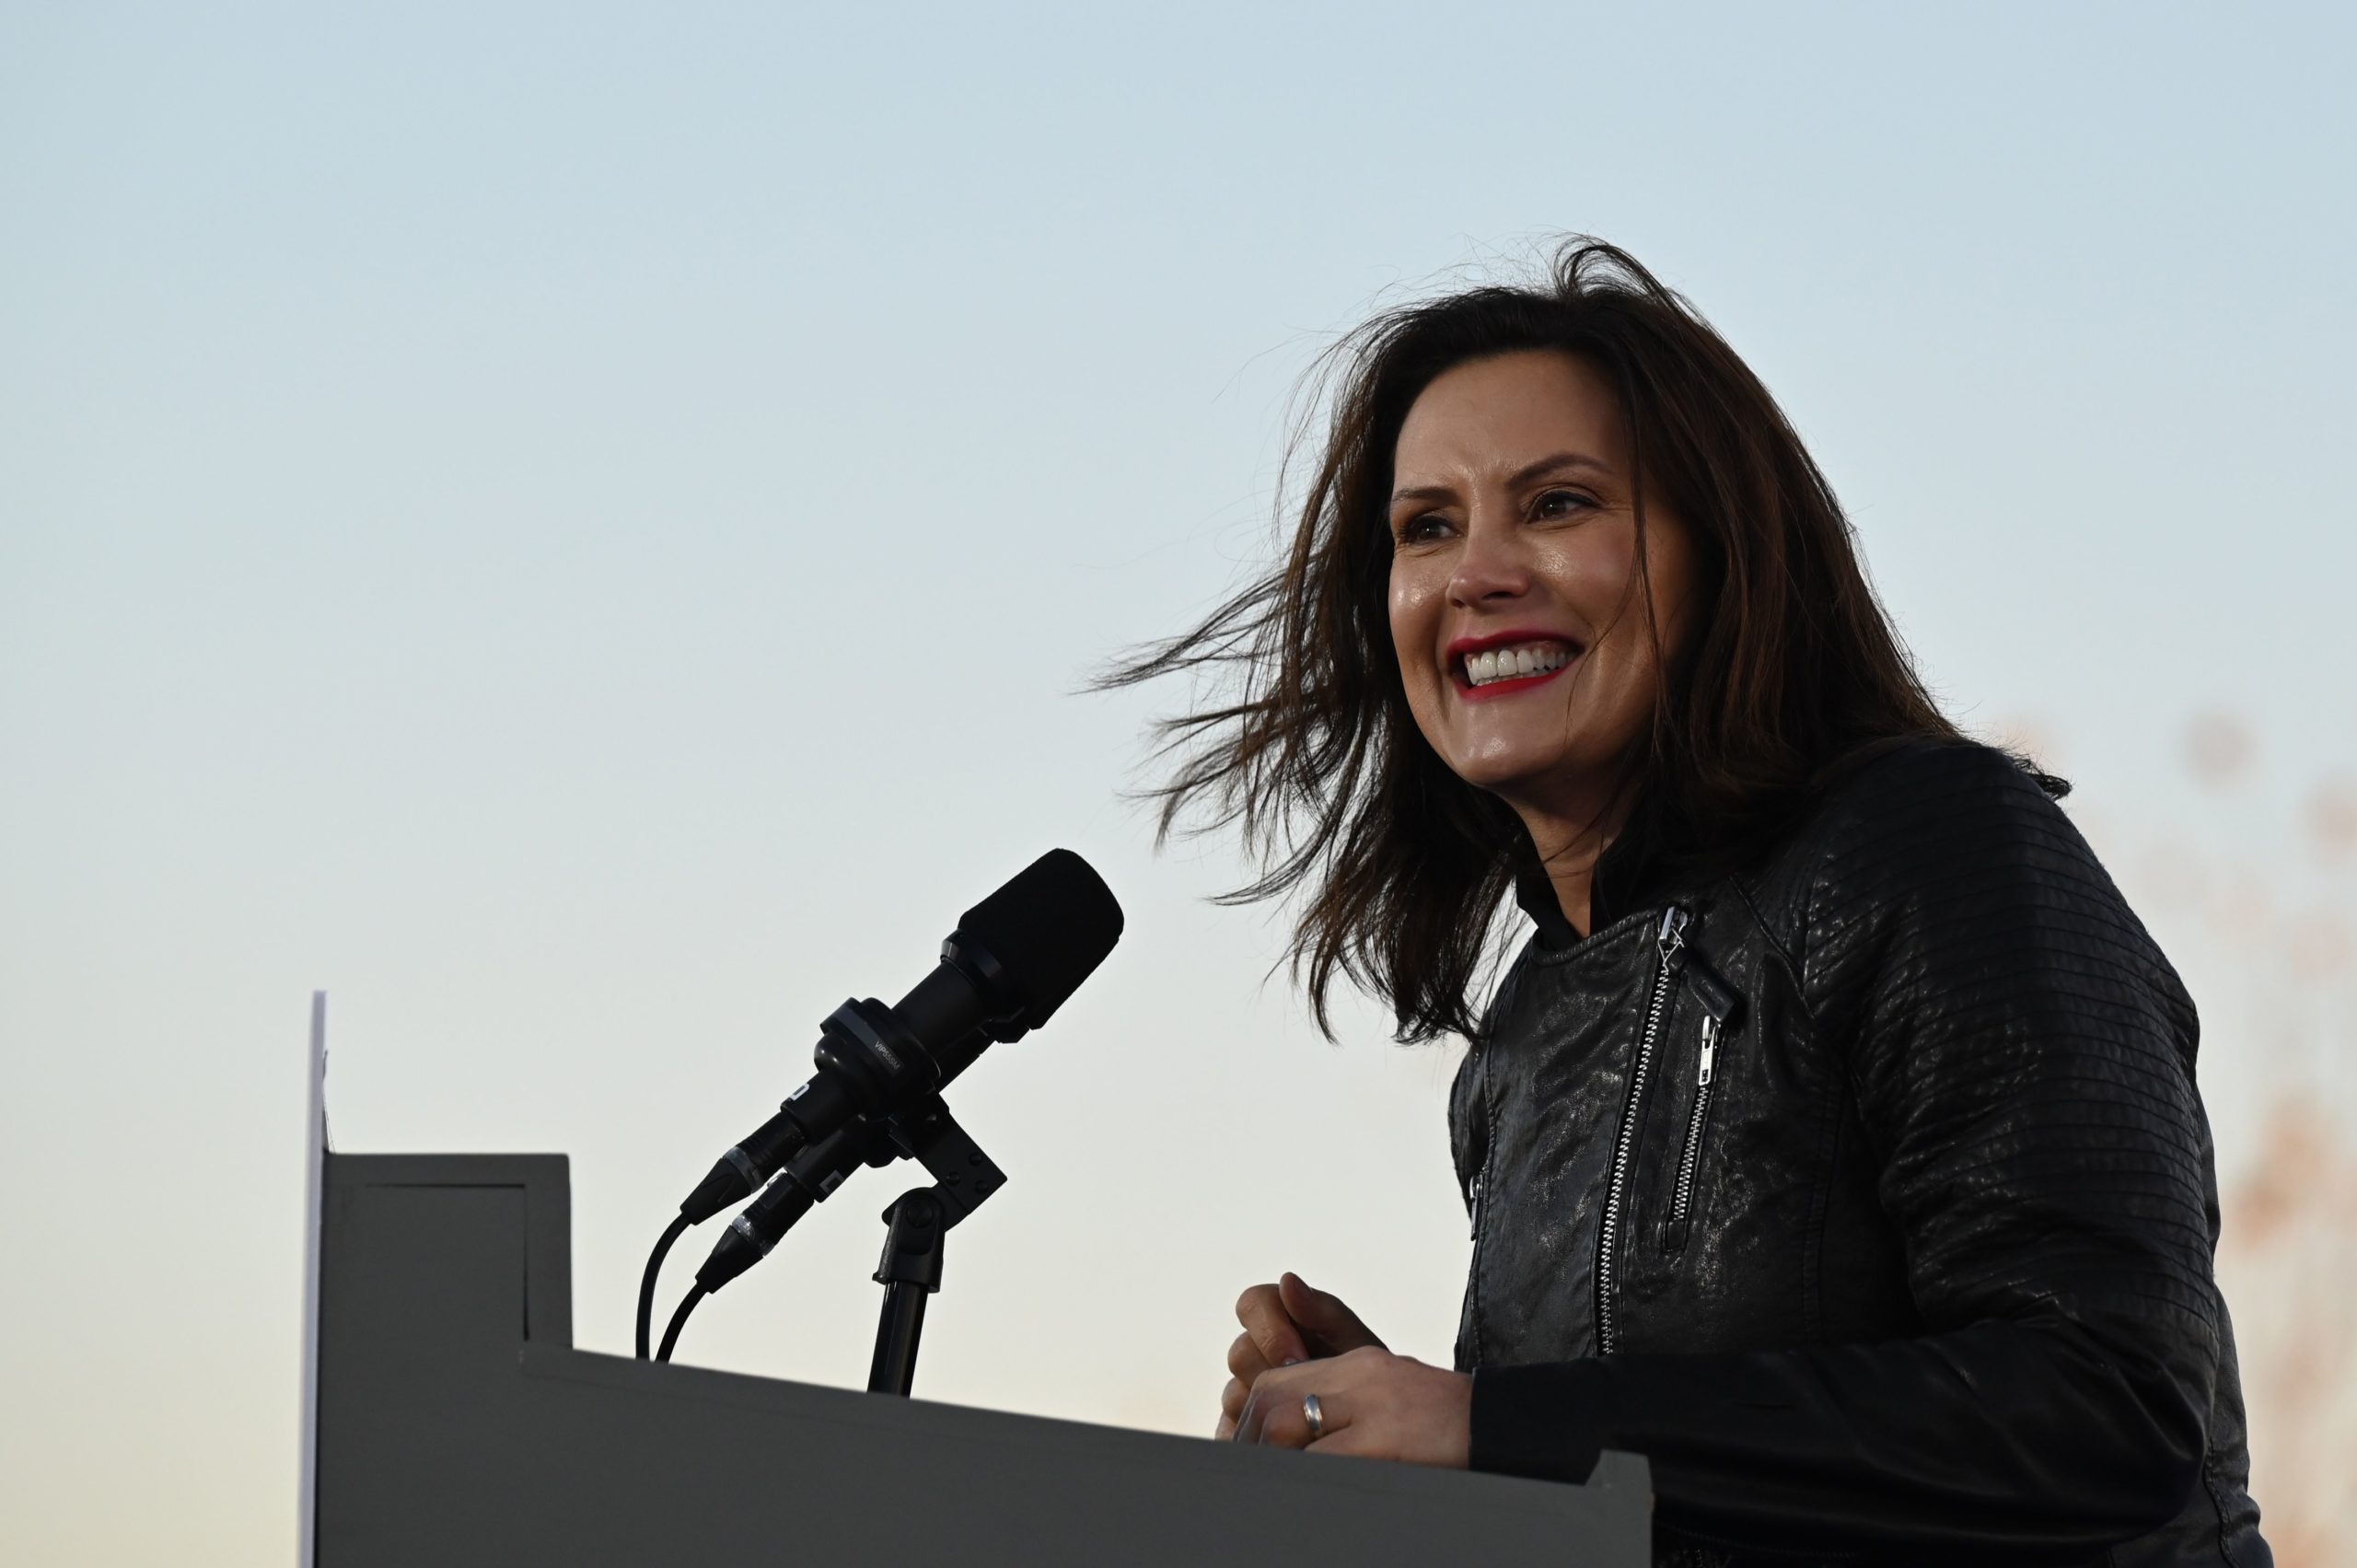 Michigan Governor Gretchen Whitmer speaks during a mobilization event at Belle Isle Casino in Detroit, Michigan, with former US President Barack Obama and Democratic Presidential candidate and former US Vice President Joe Biden, on October 31, 2020. (JIM WATSON/AFP via Getty Images)